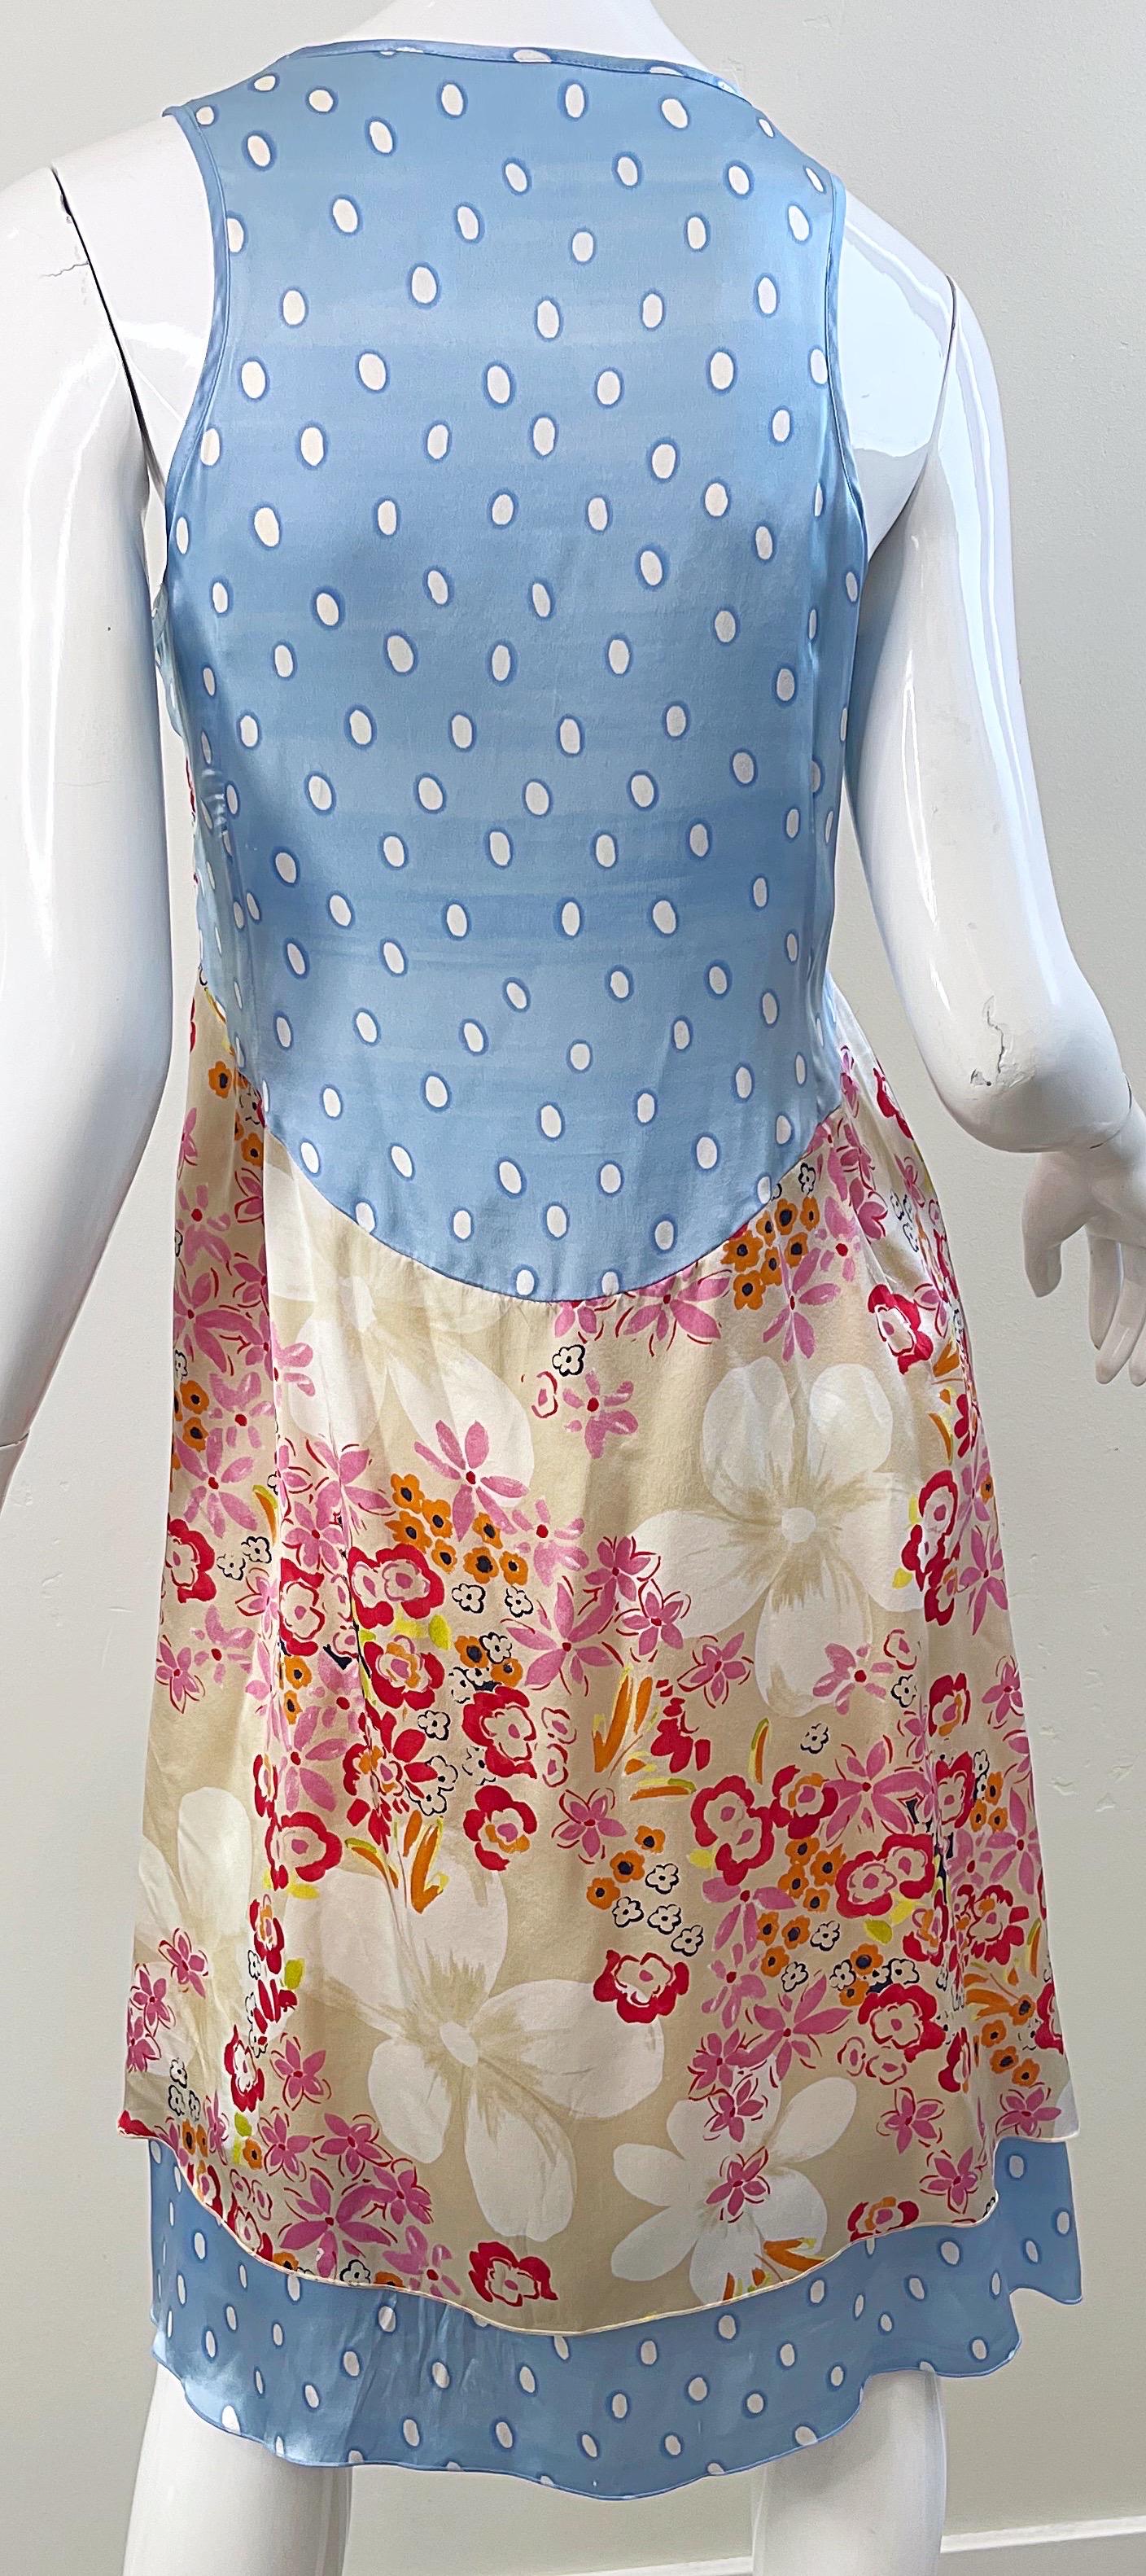 1990s Escada Sport Size 44 / 12 Flowers Polka Dot Print Vintage 90s Silk Dress In Excellent Condition For Sale In San Diego, CA